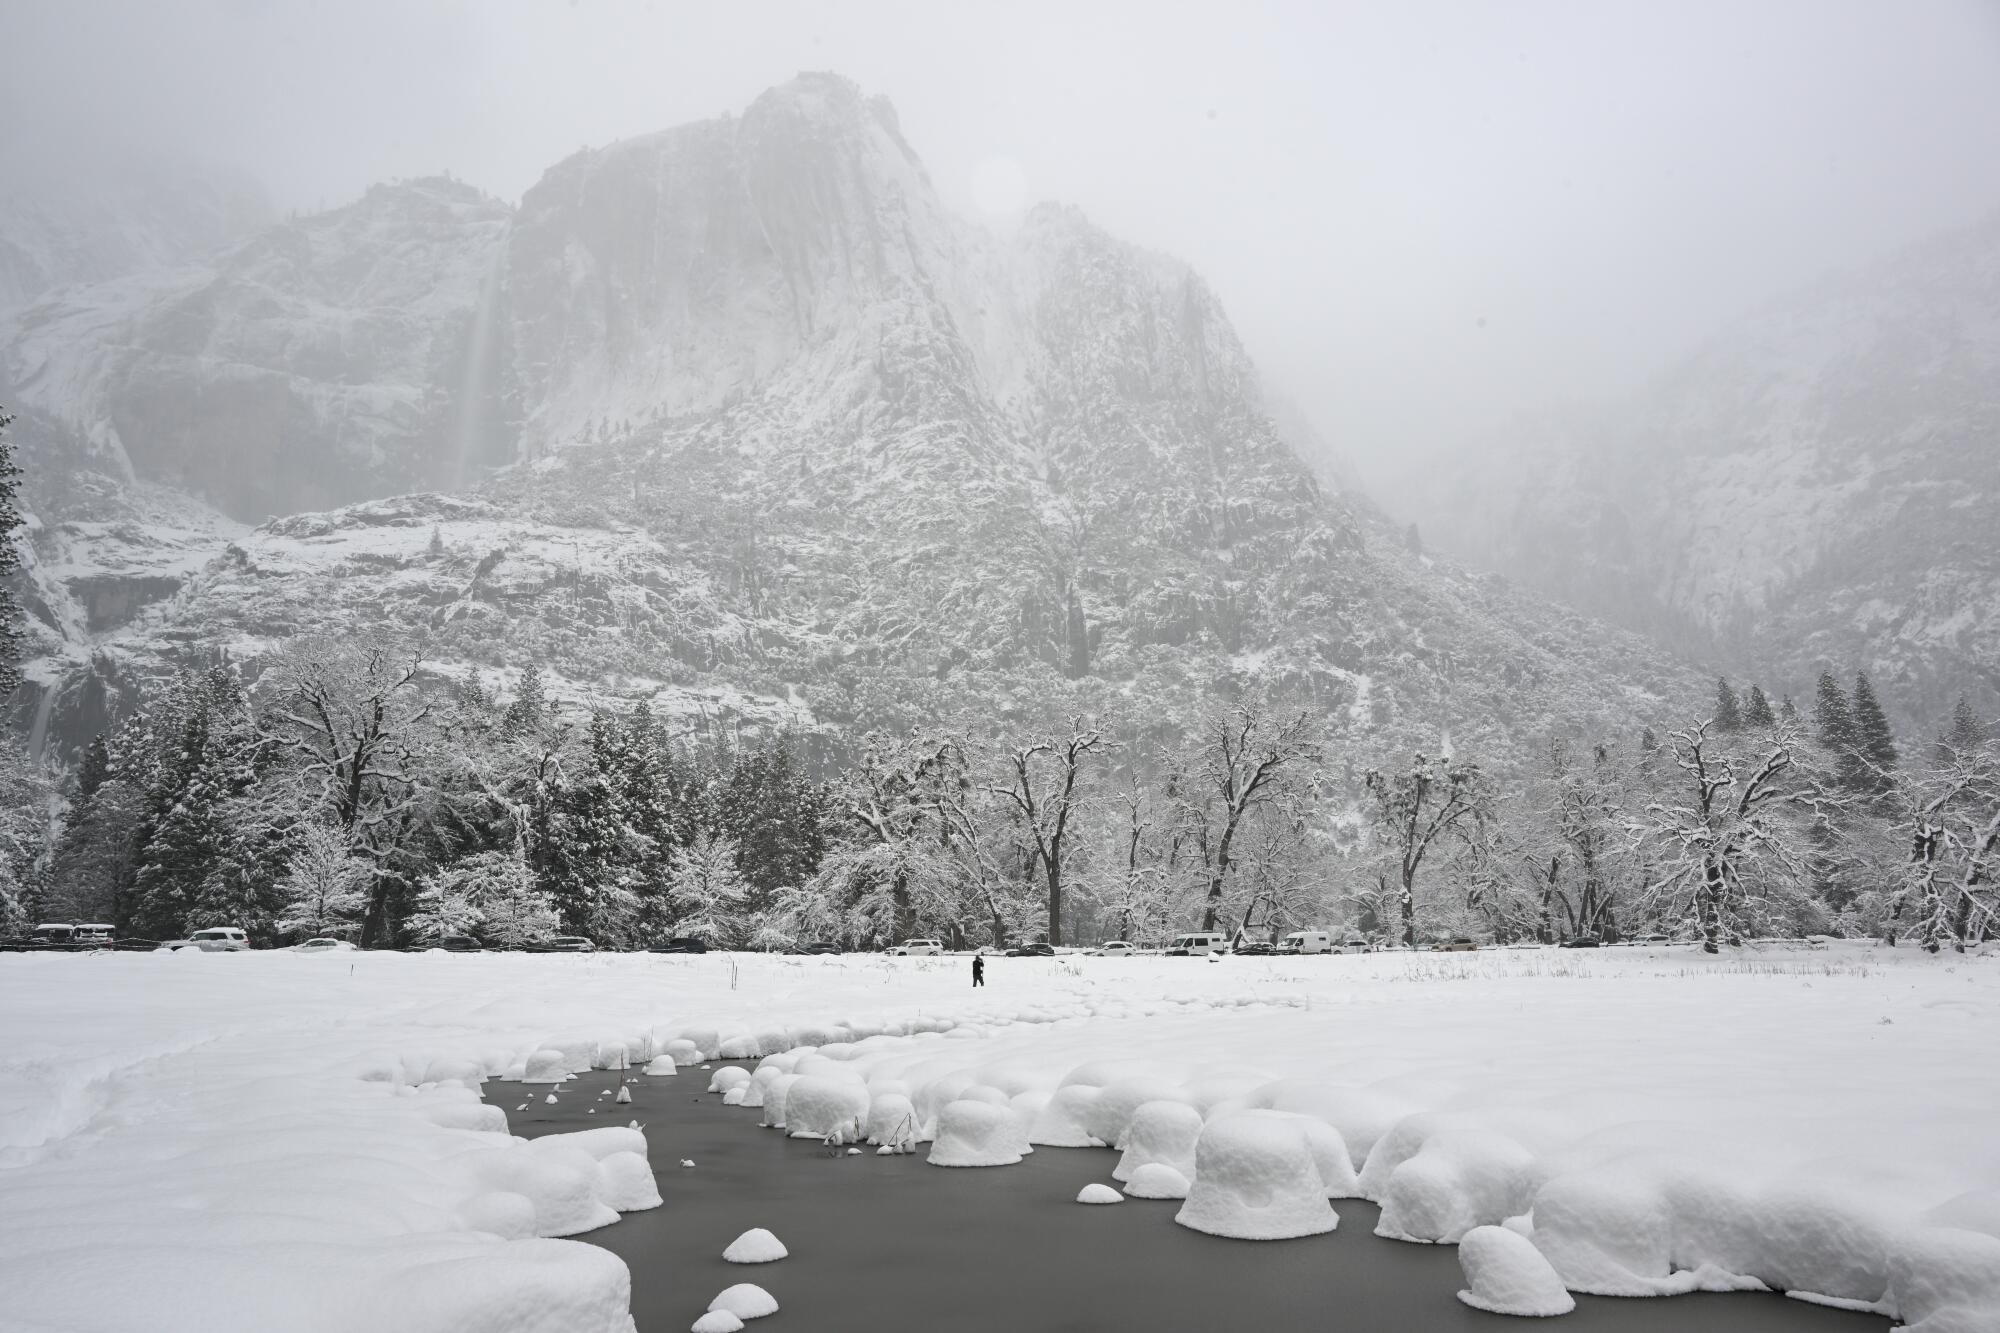 Large amounts of snow blanket the valley floor inside Yosemite National Park.